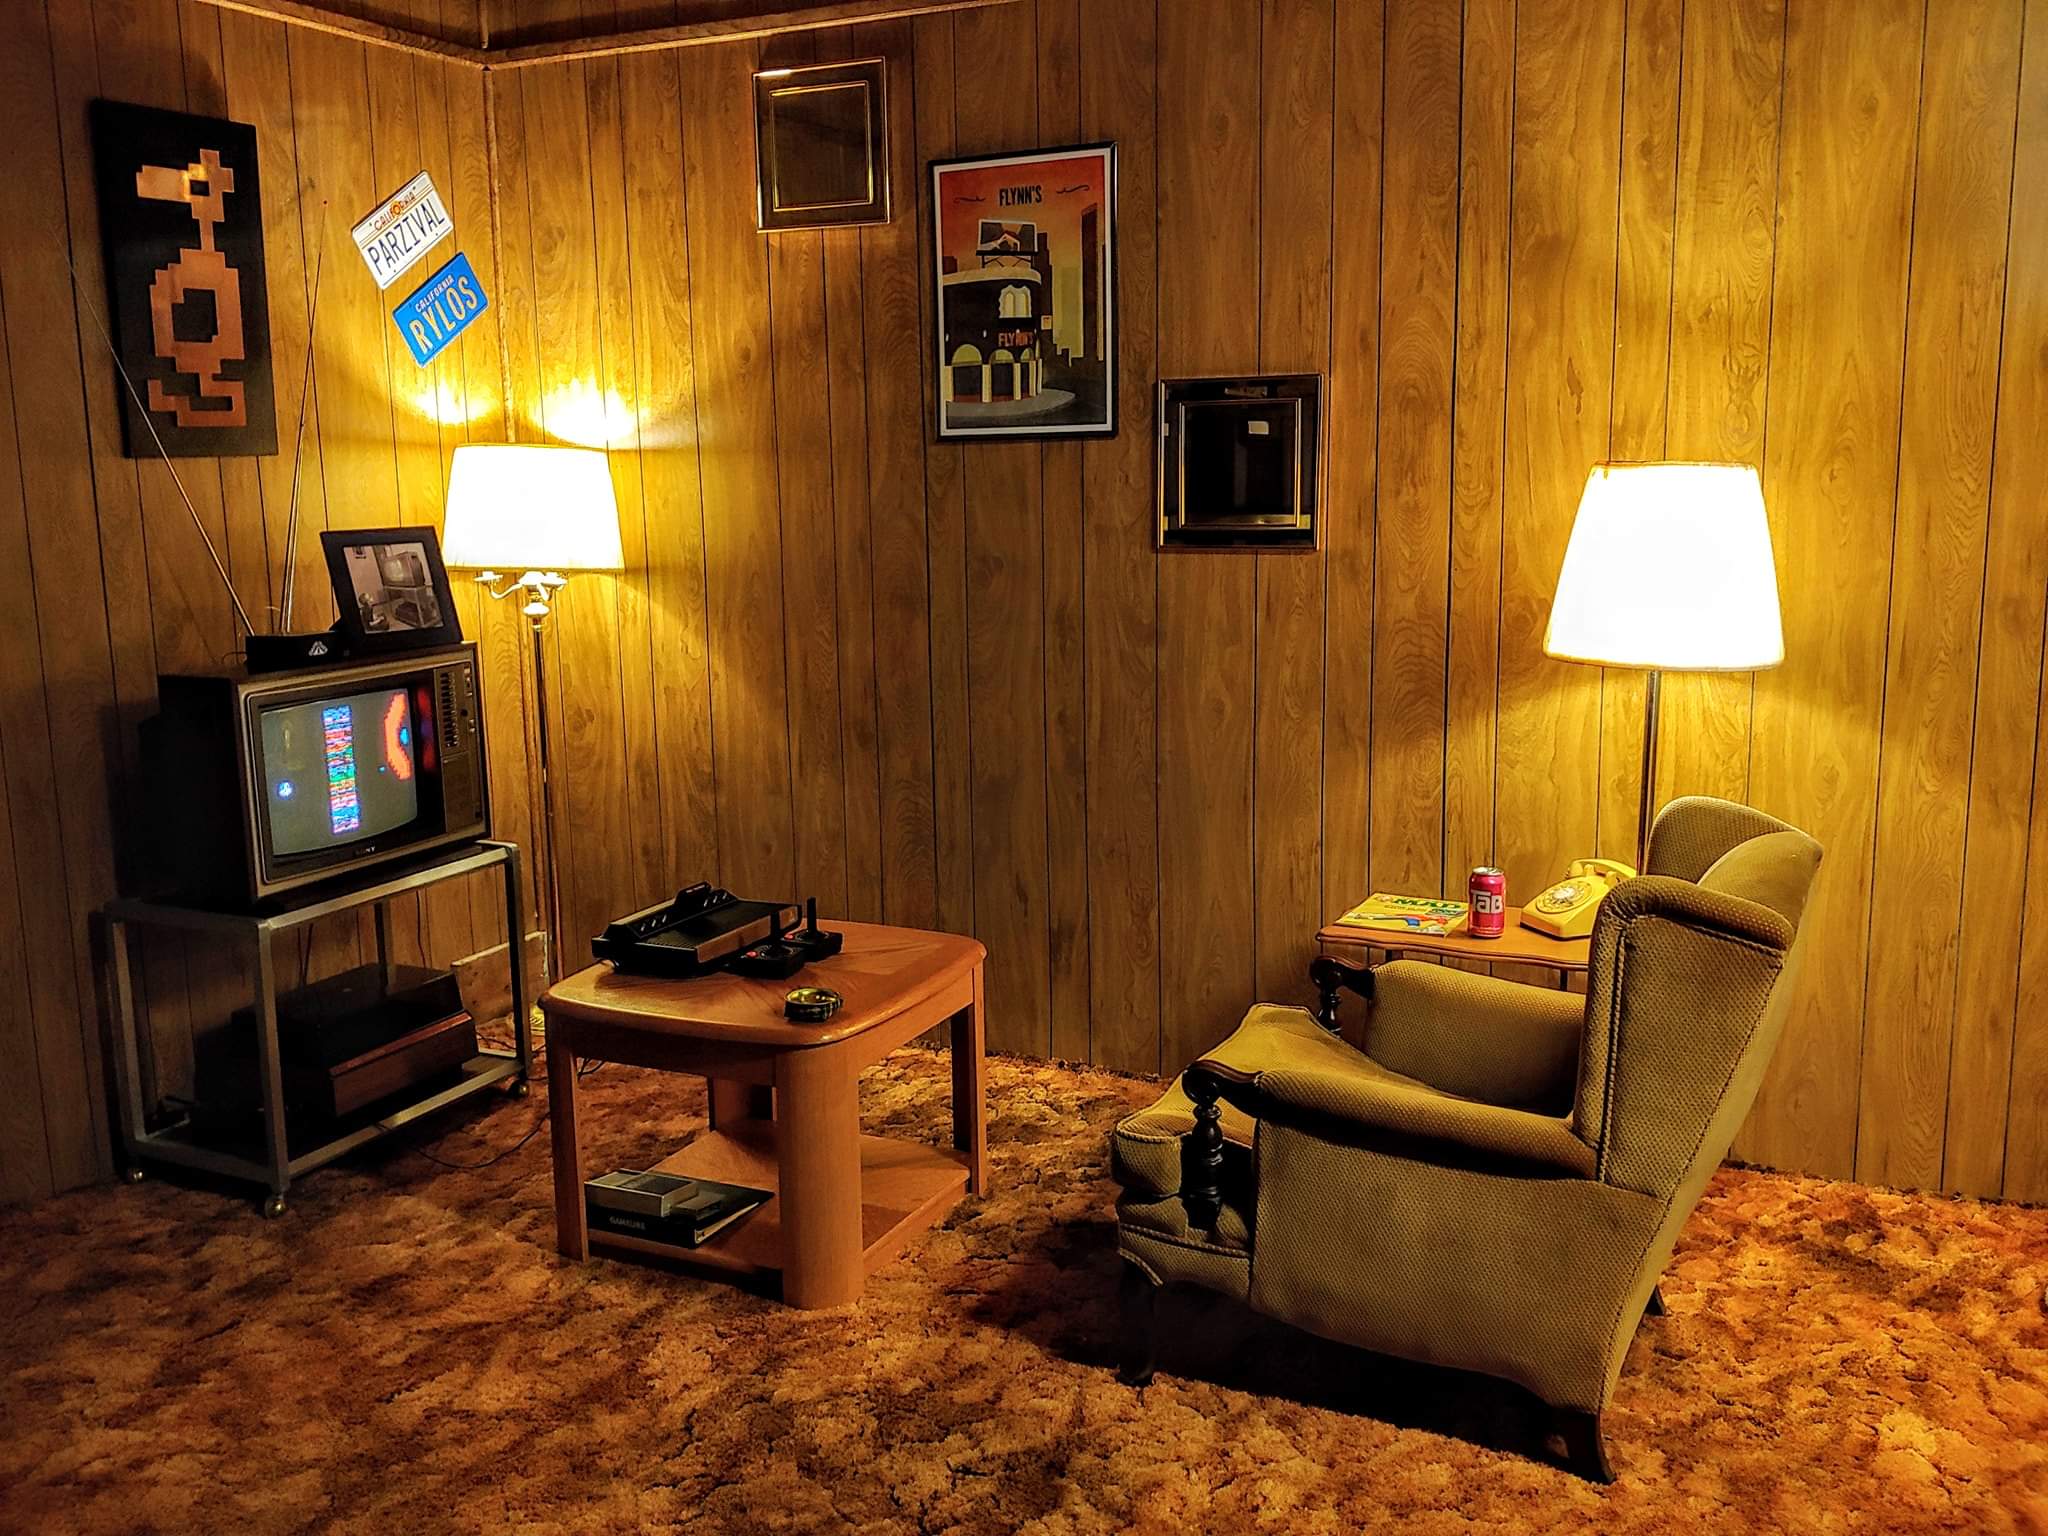 Retro Gaming Room its was a Yars' Revenge type of night